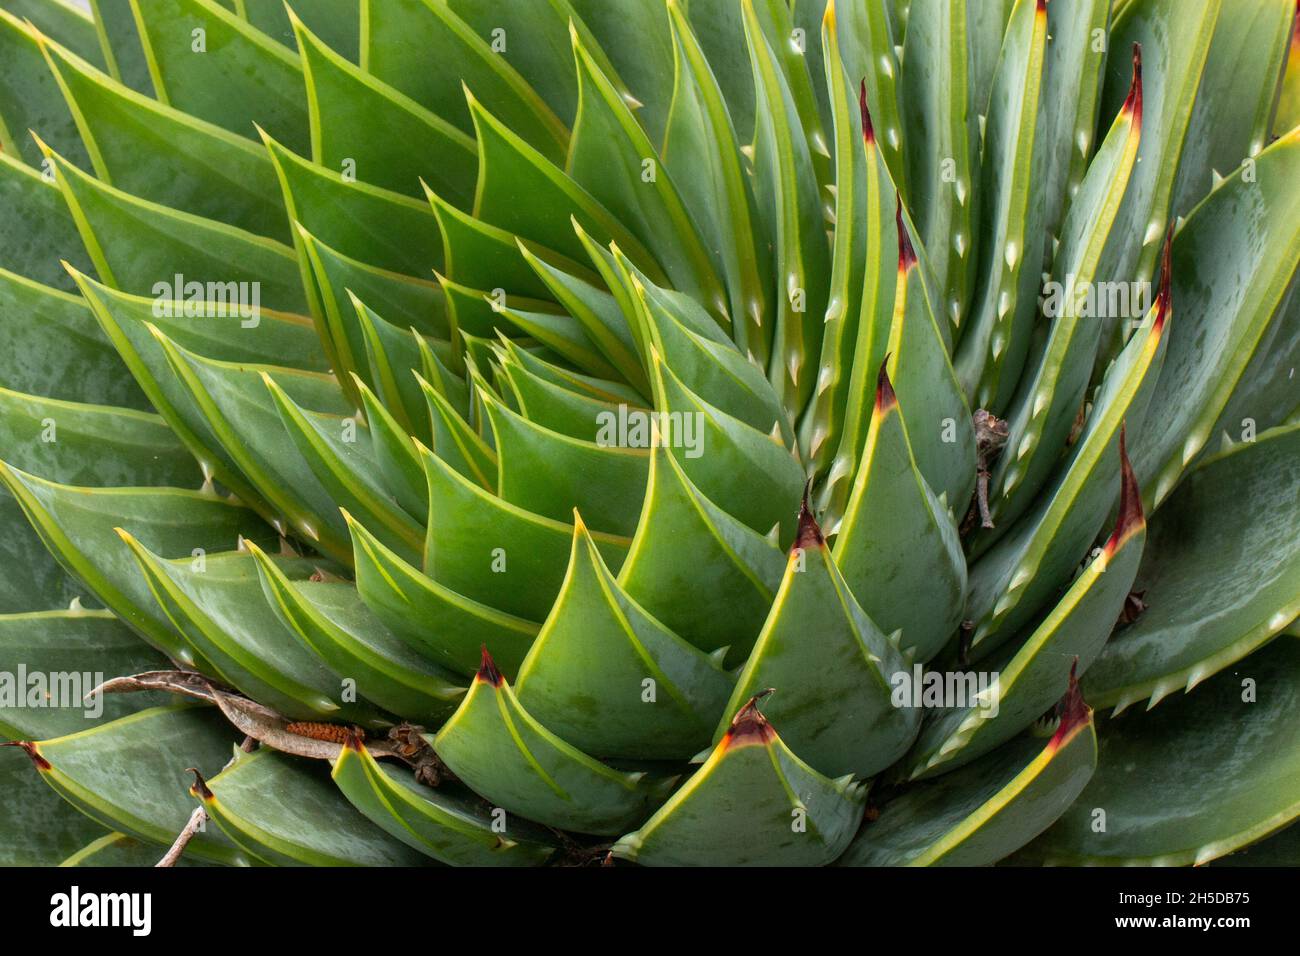 Spiky Leaves of a succulent creating a spiral effect, close-up, cactus, texture Stock Photo